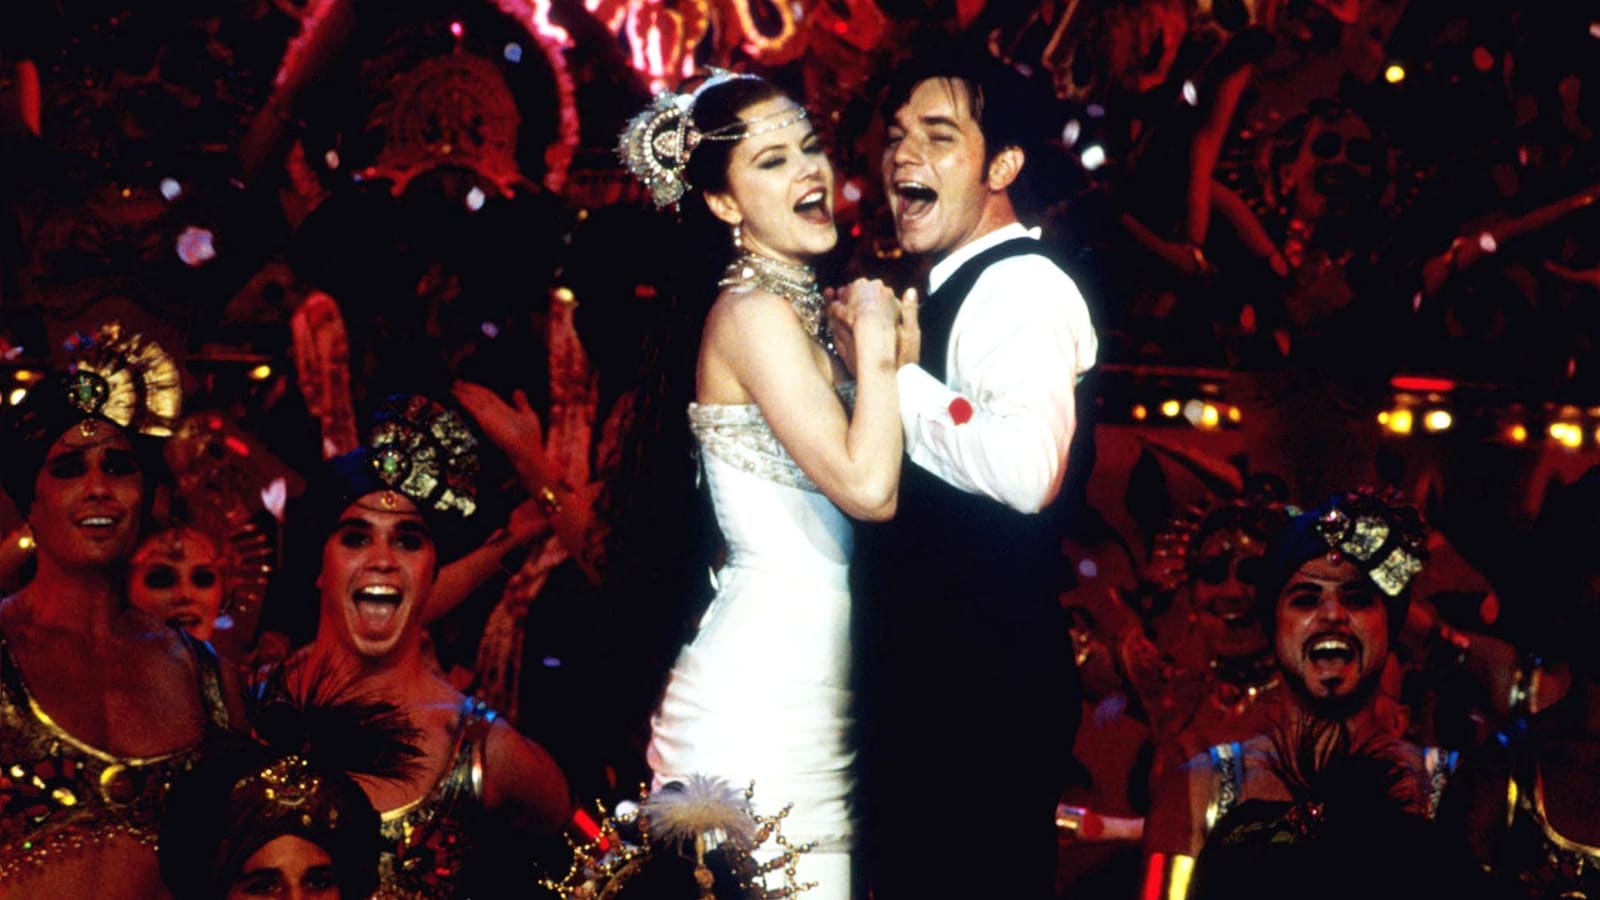 moulin-rouge-2001